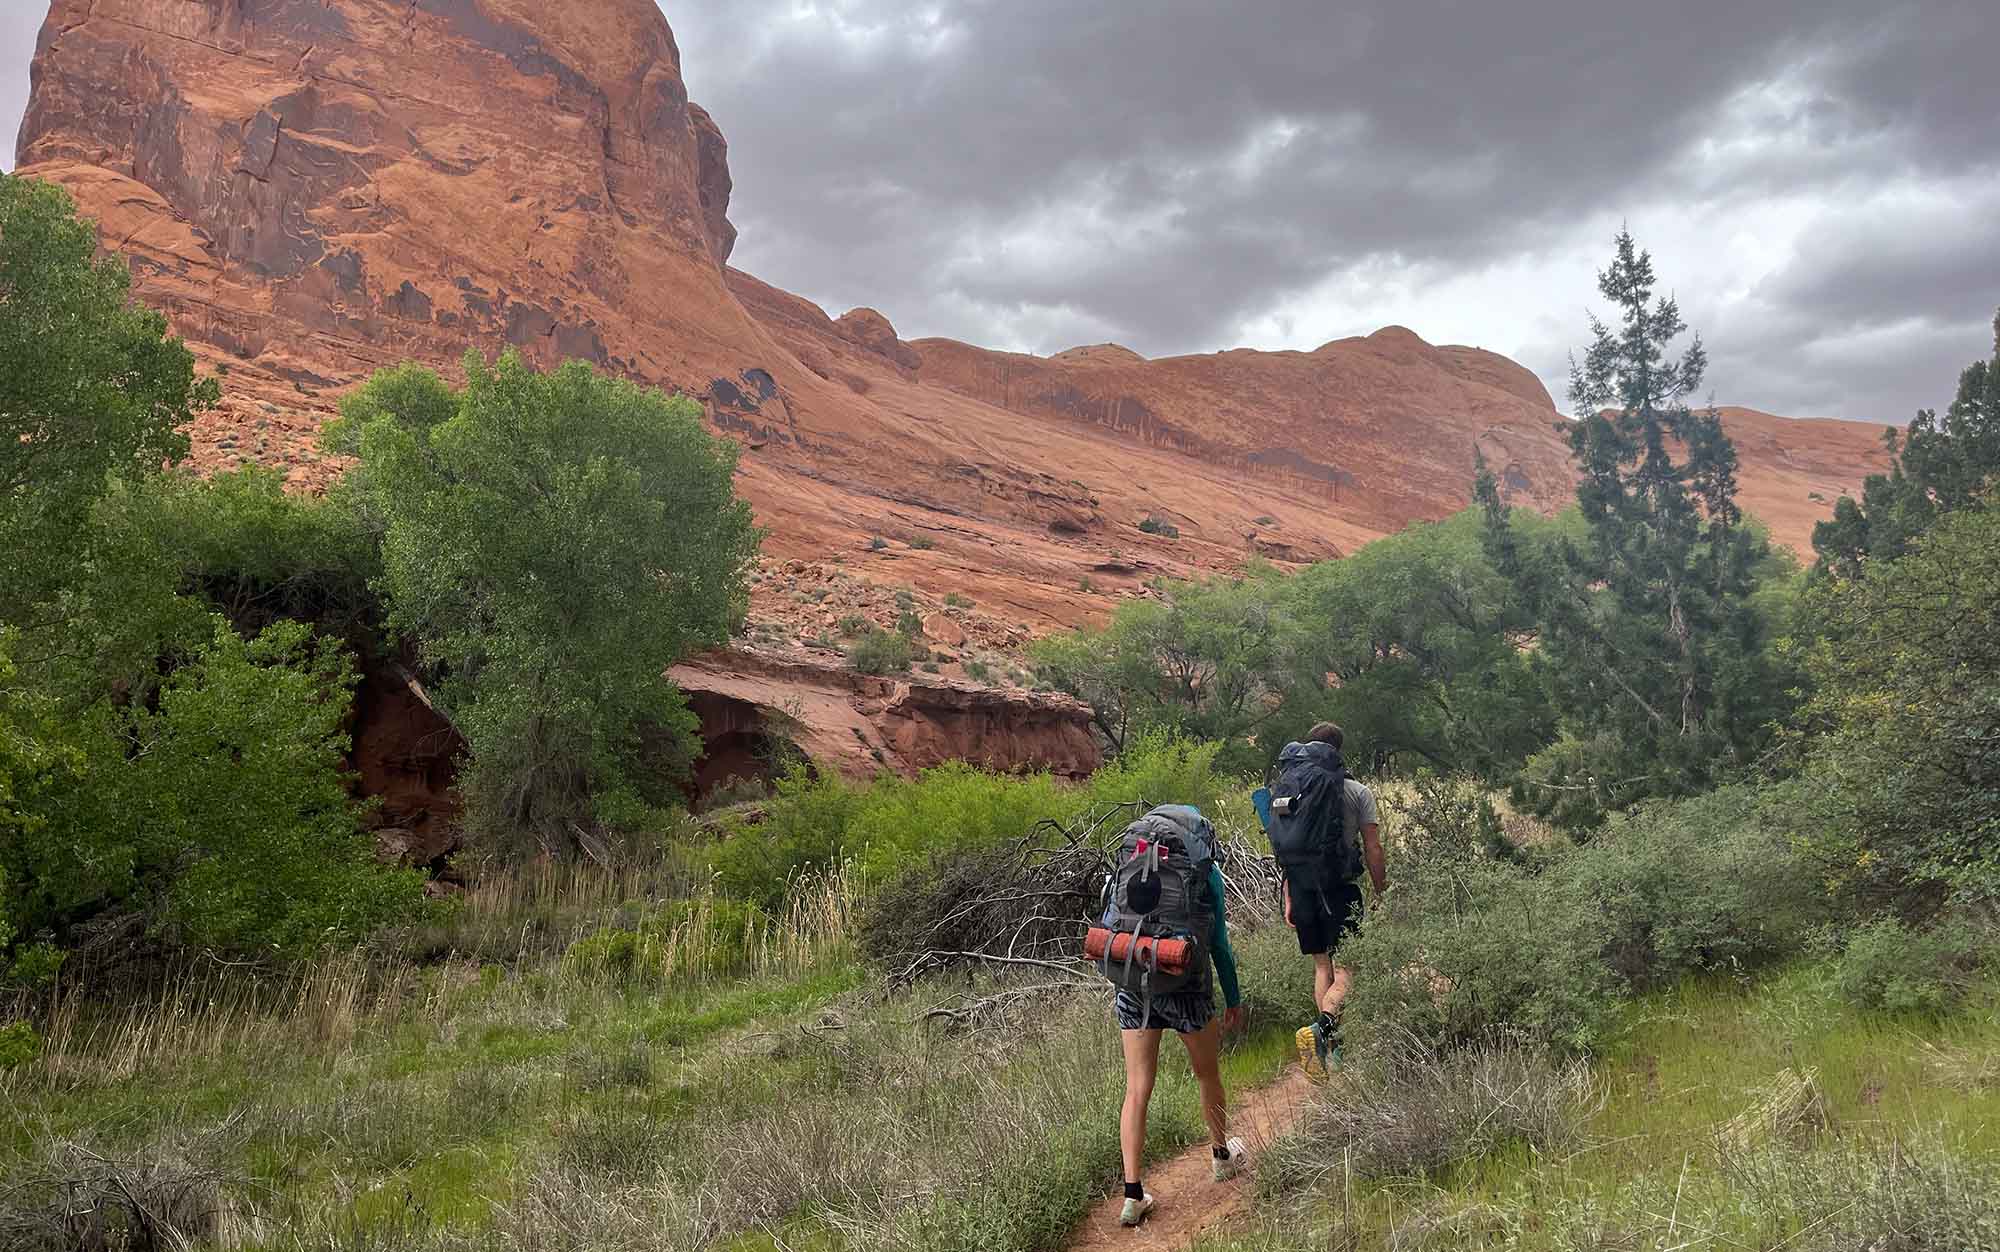 Backpackers walk single file on trail to leave no trace.